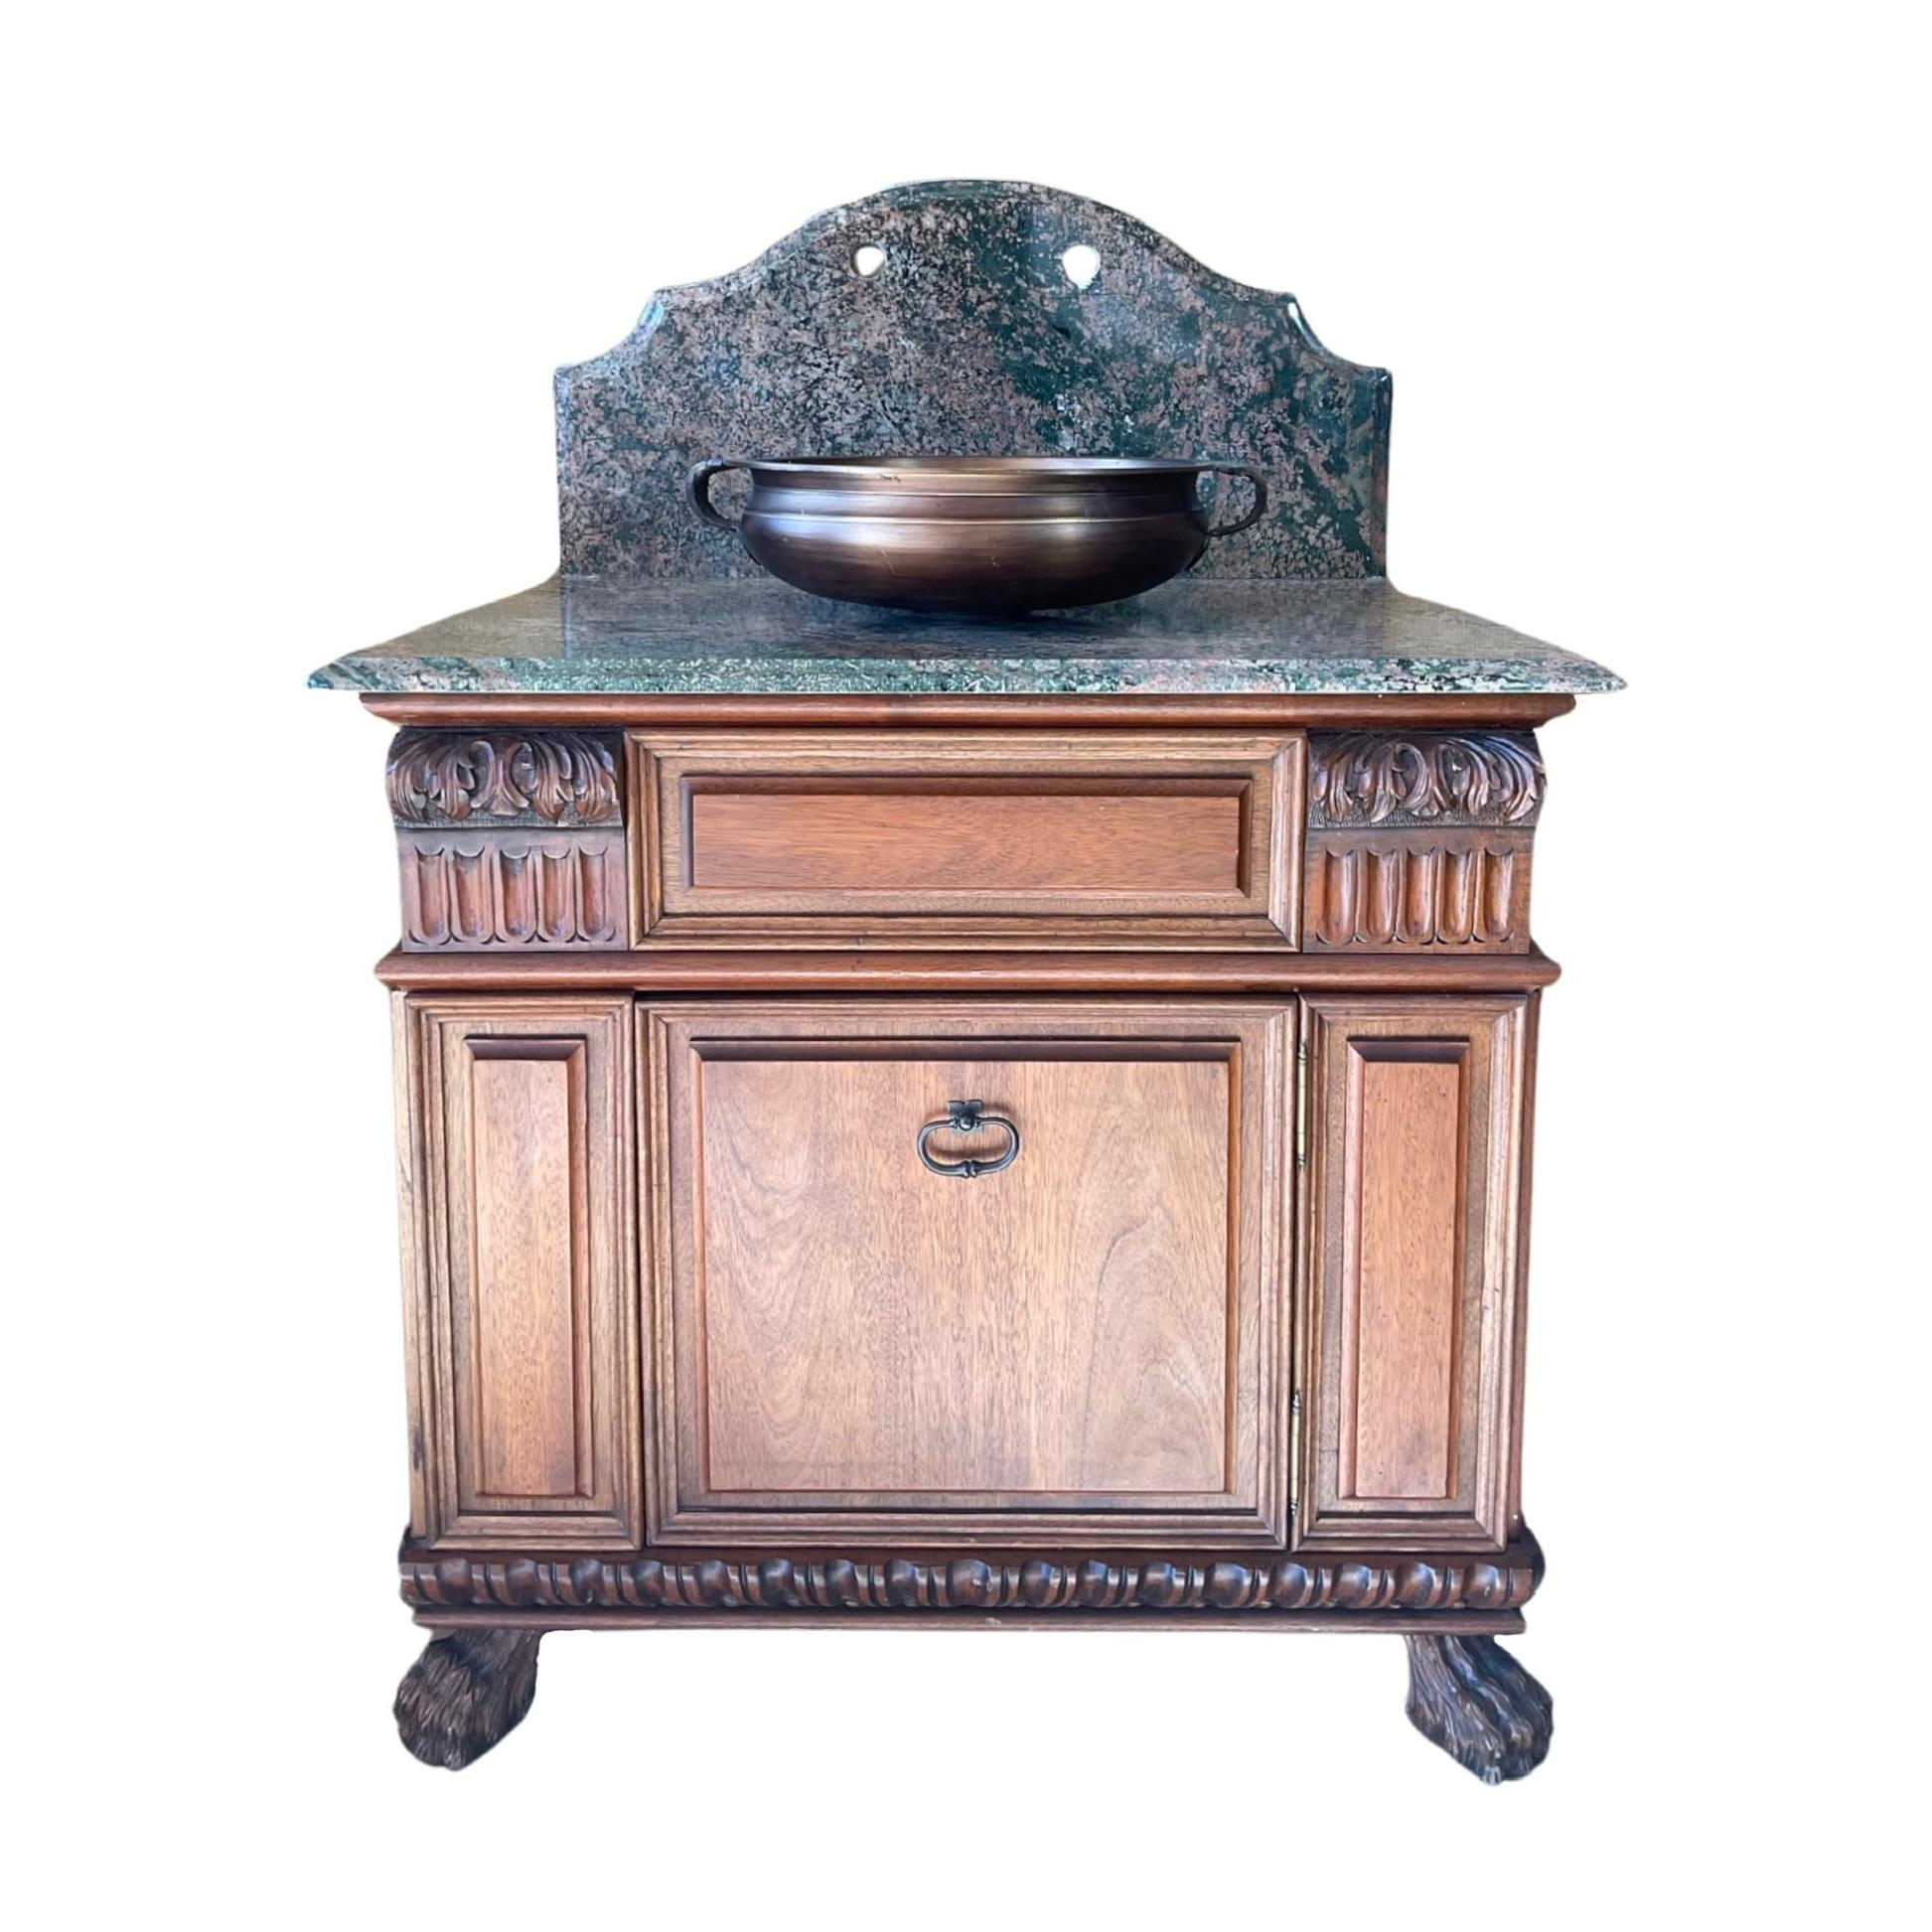 This French-made sink combines contemporary design with classic style. The bottom base is crafted with walnut wood, while the top and backsplash are made from polished marble. Delicate carvings, copper accents, and a unique hardware set complete the